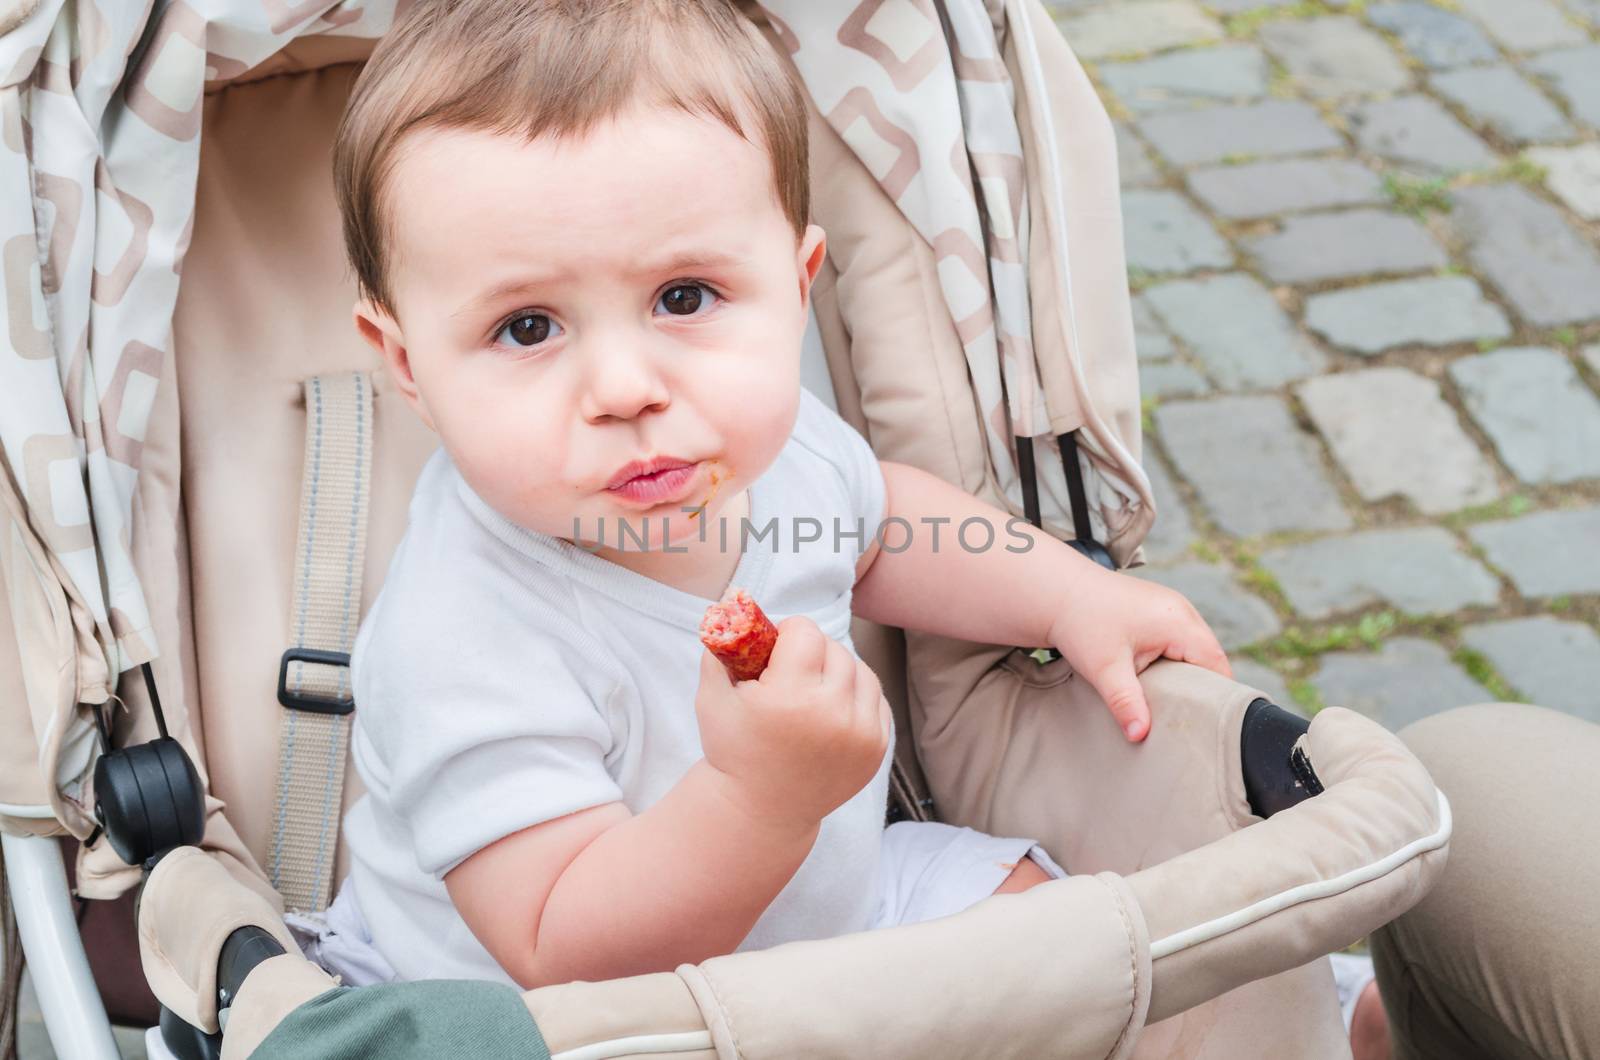 Child in stroller eating a sausage by JFsPic